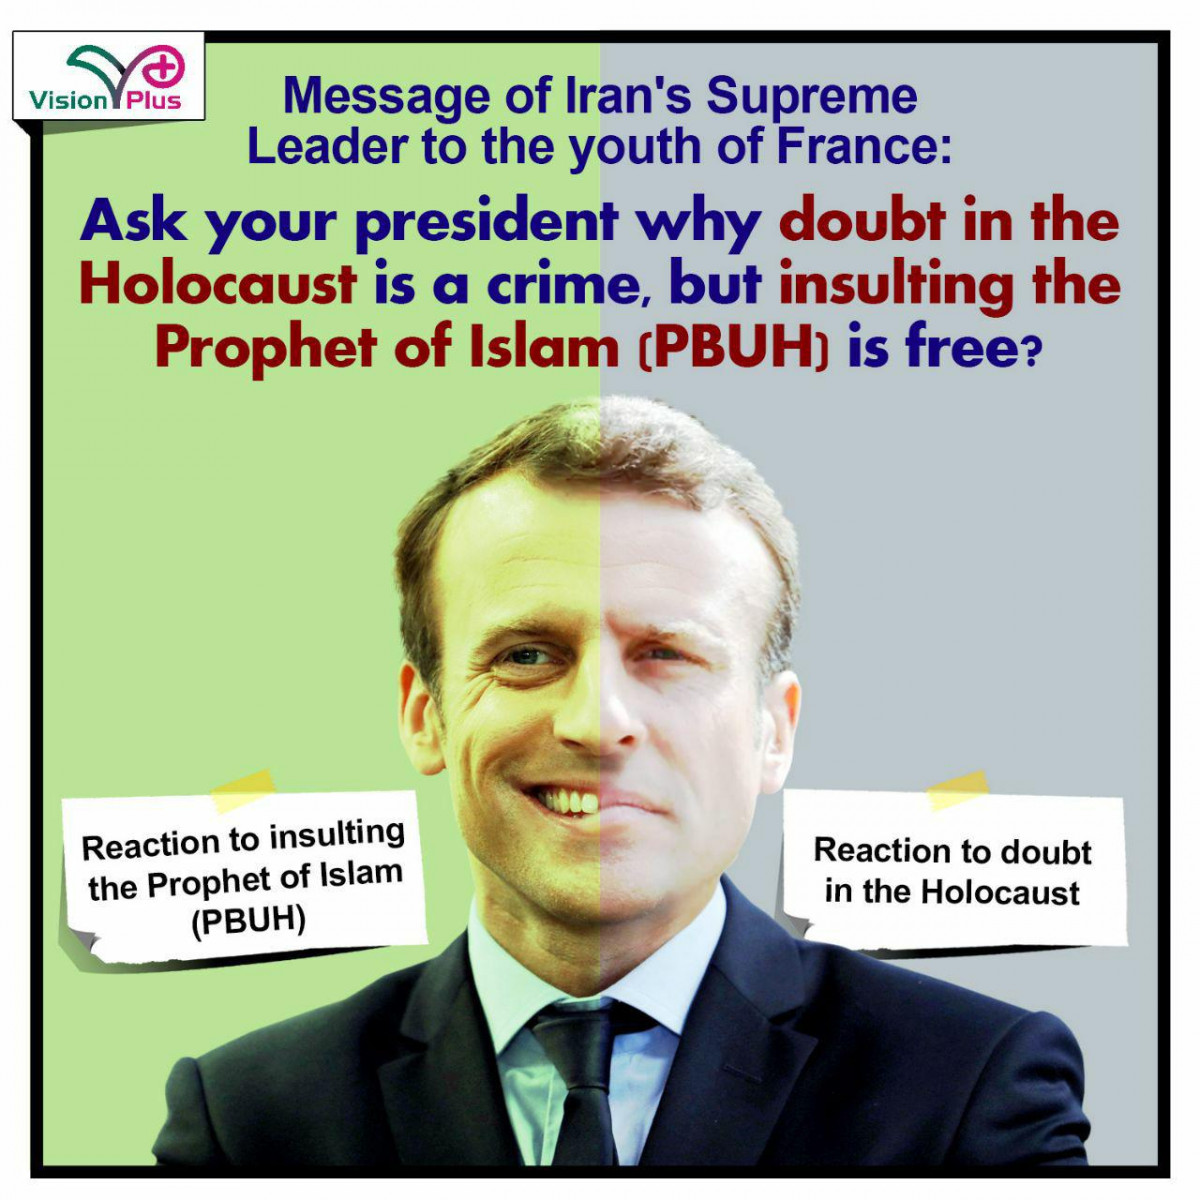 Ask your president why doubt in the Holocaust is a crime, but insulting the Prophet of Islam (PBUH) is free?